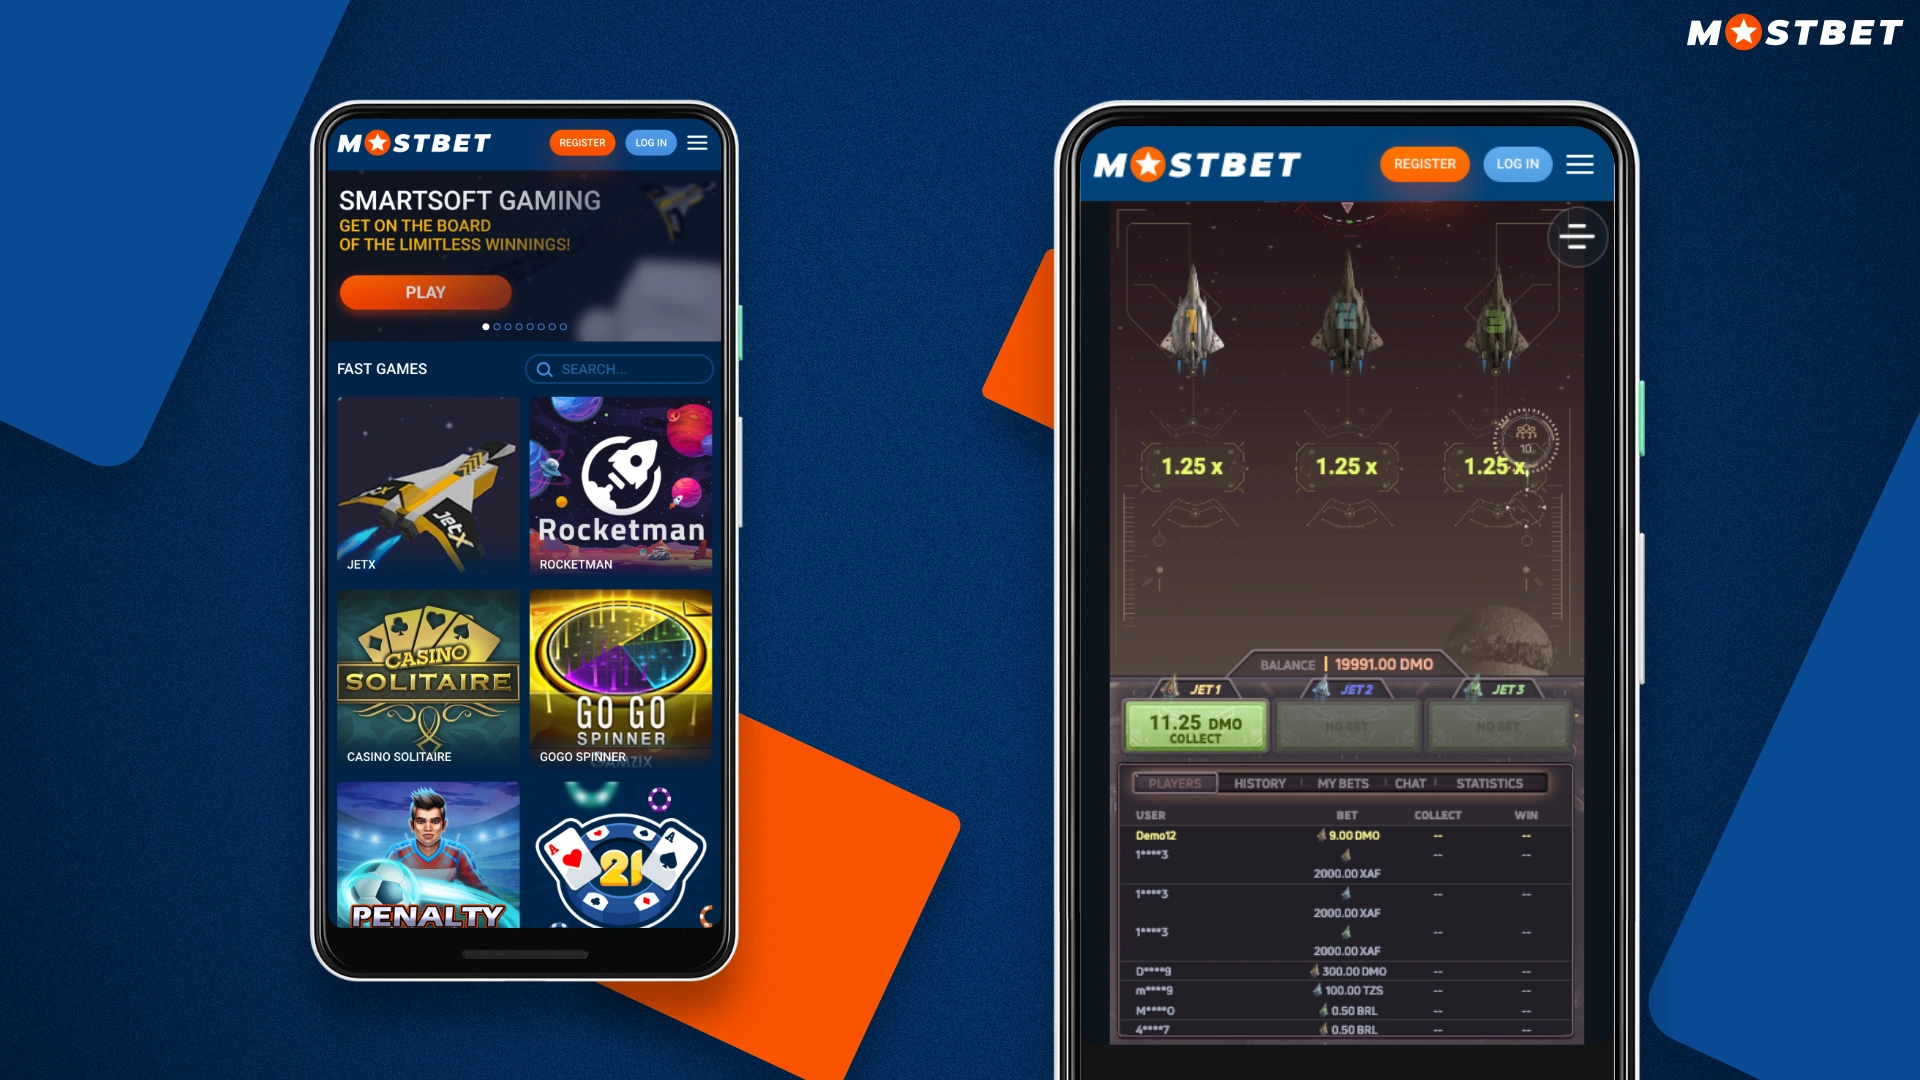 Learn more about fast games at MOSTBET